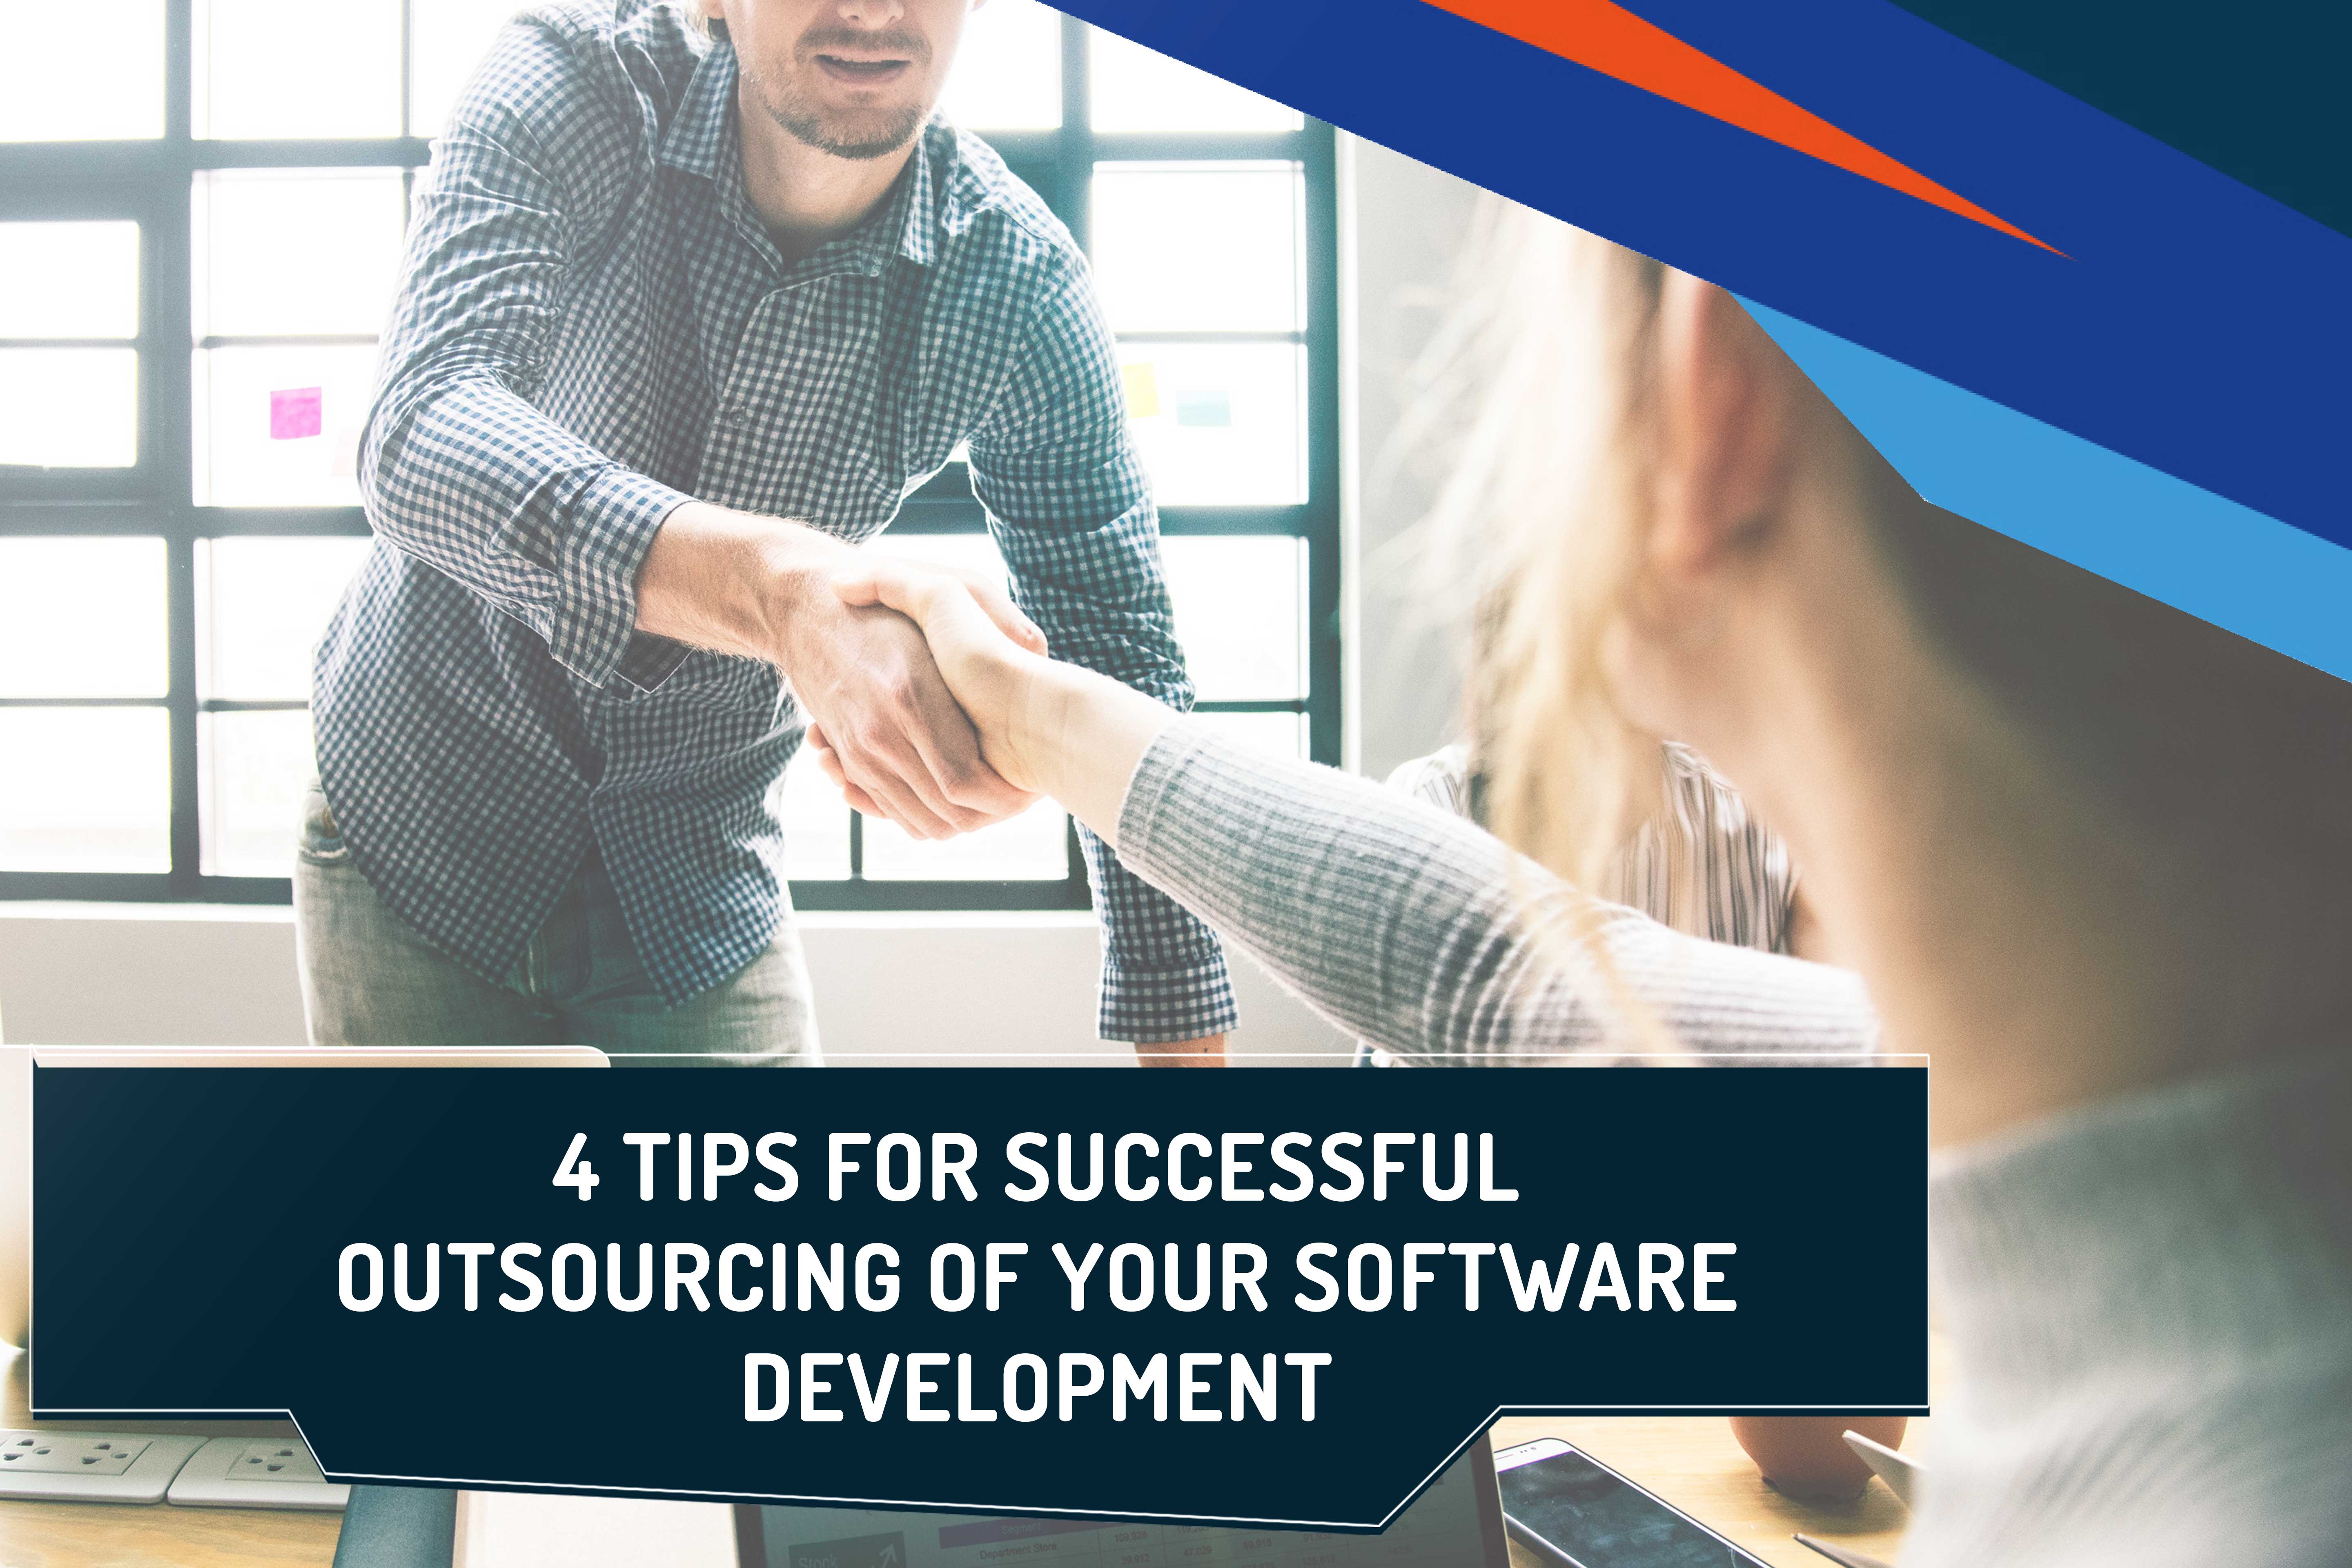 4 TIPS FOR SUCCESSFUL OUTSOURCING OF YOUR SOFTWARE DEVELOPMENT